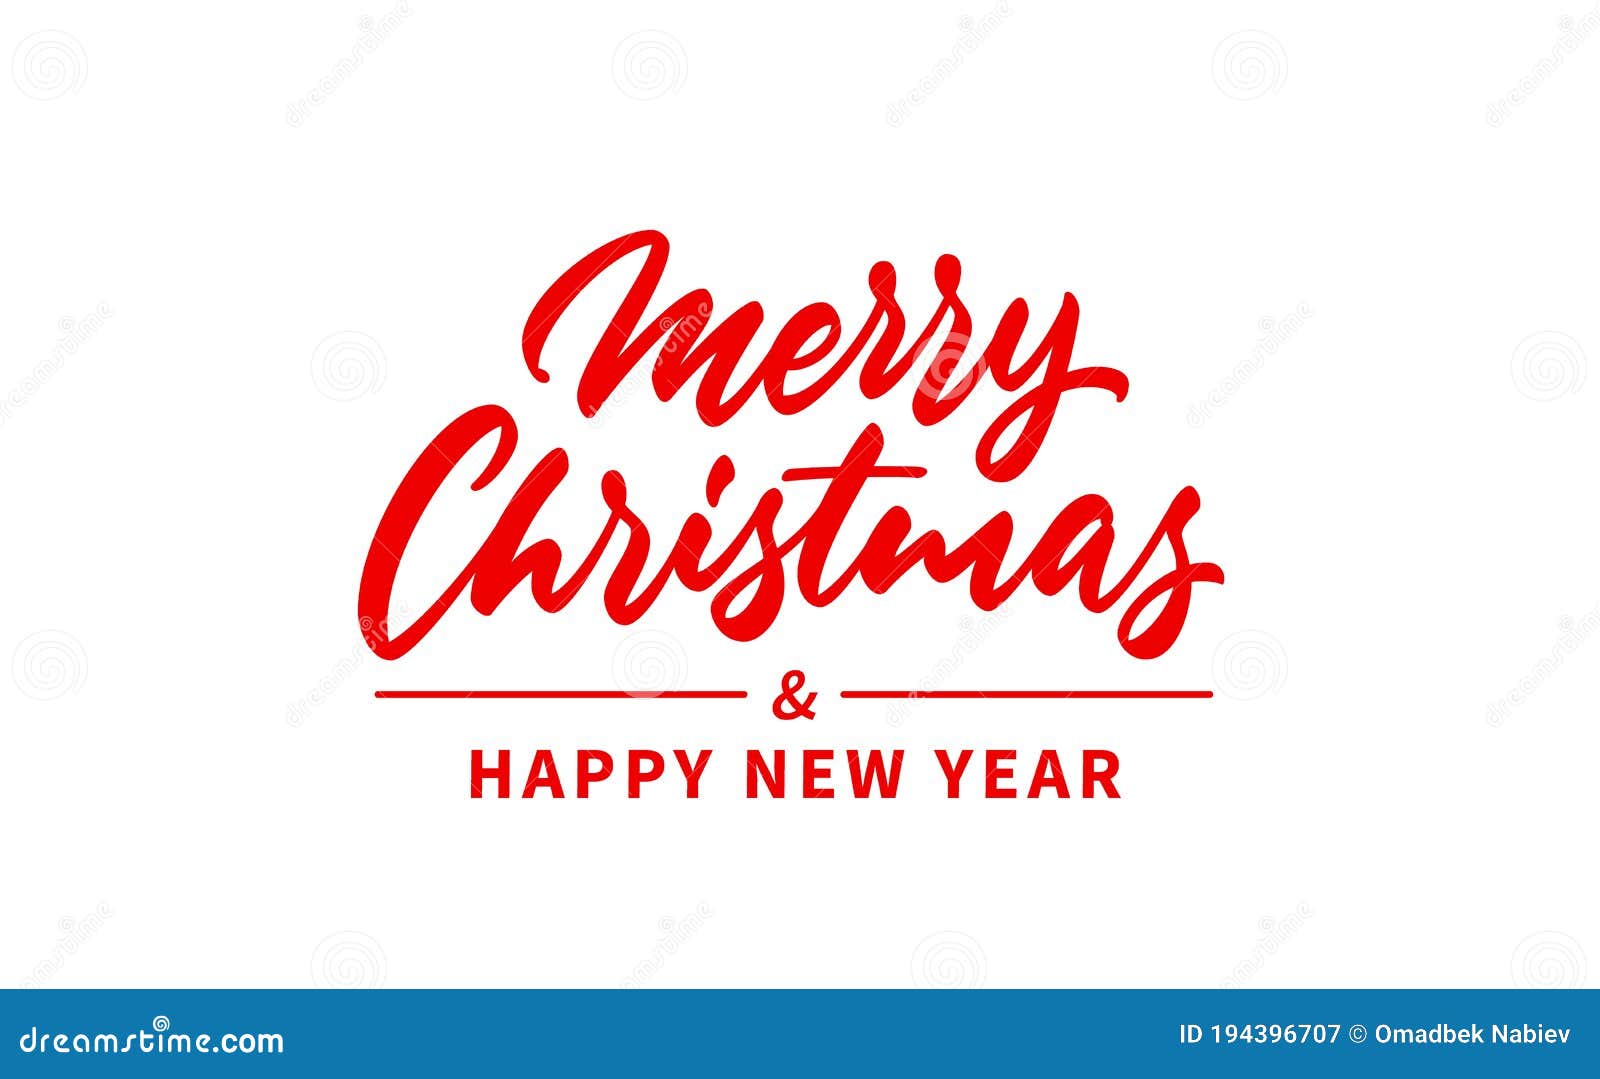 merry christmas and happy new year handwritten text